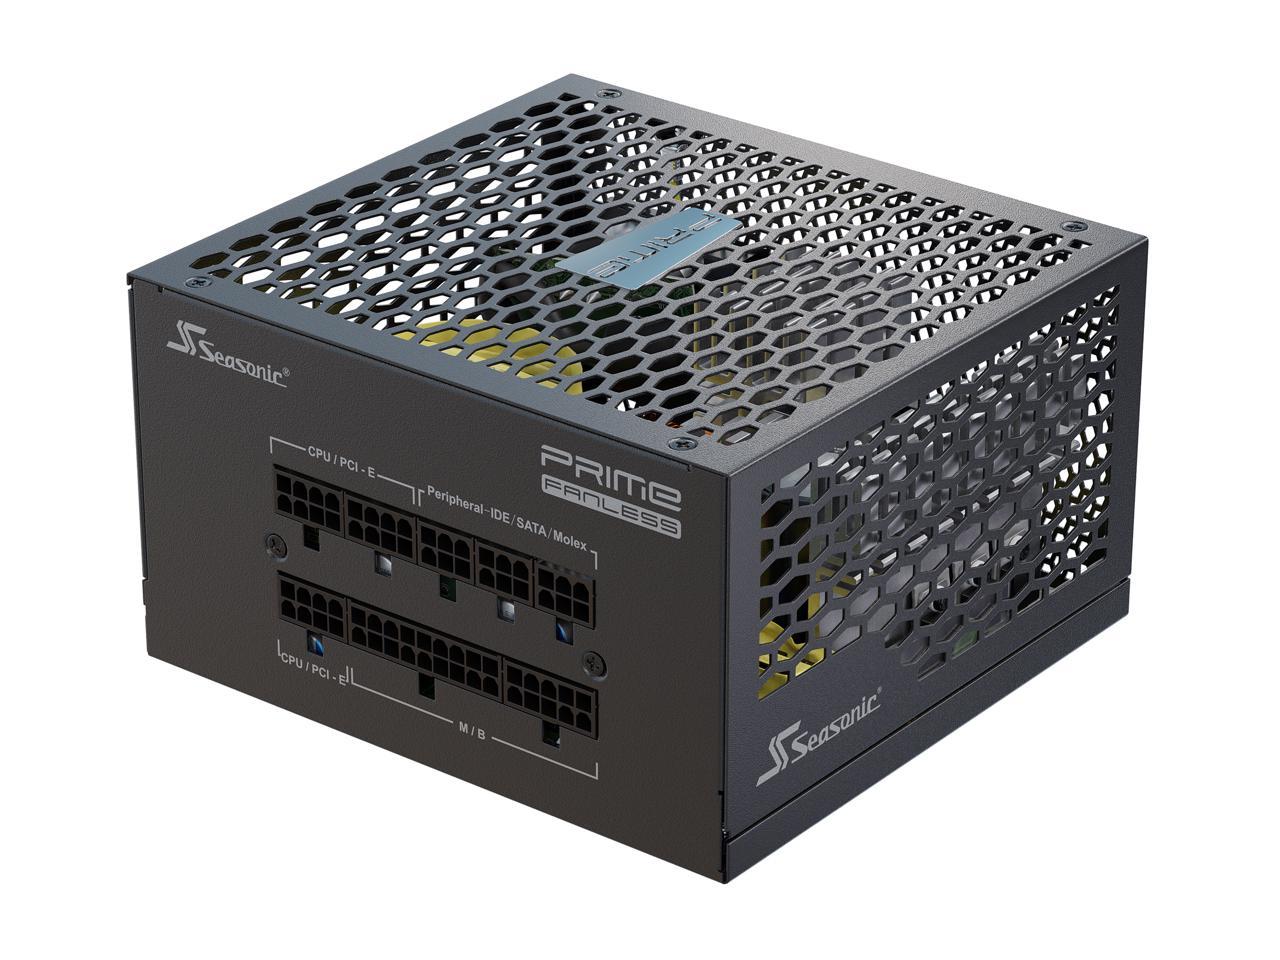 Seasonic PRIME FANLESS PX-450, 450W 80+ Platinum, Full Modular, ATX12V & EPS12V, True Fanless Design, 12 Year Warranty, Perfect Power Supply For Situations That Demand Silence From The Equipment.